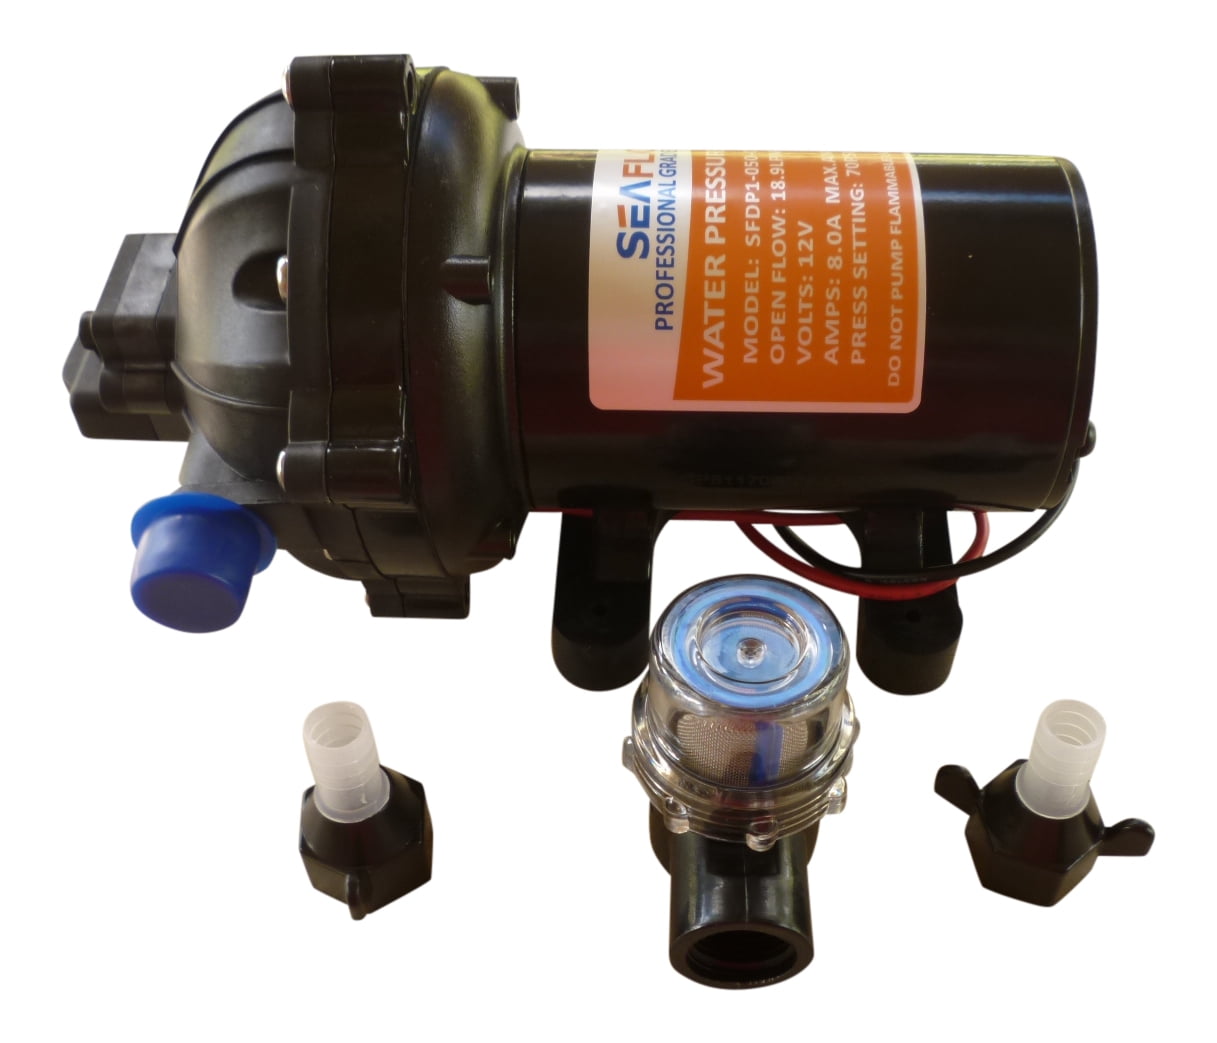 Details about   12V DC Fresh Water Pump With Hose Clamp Diaphragm Pump Self Priming FREE SHIP 